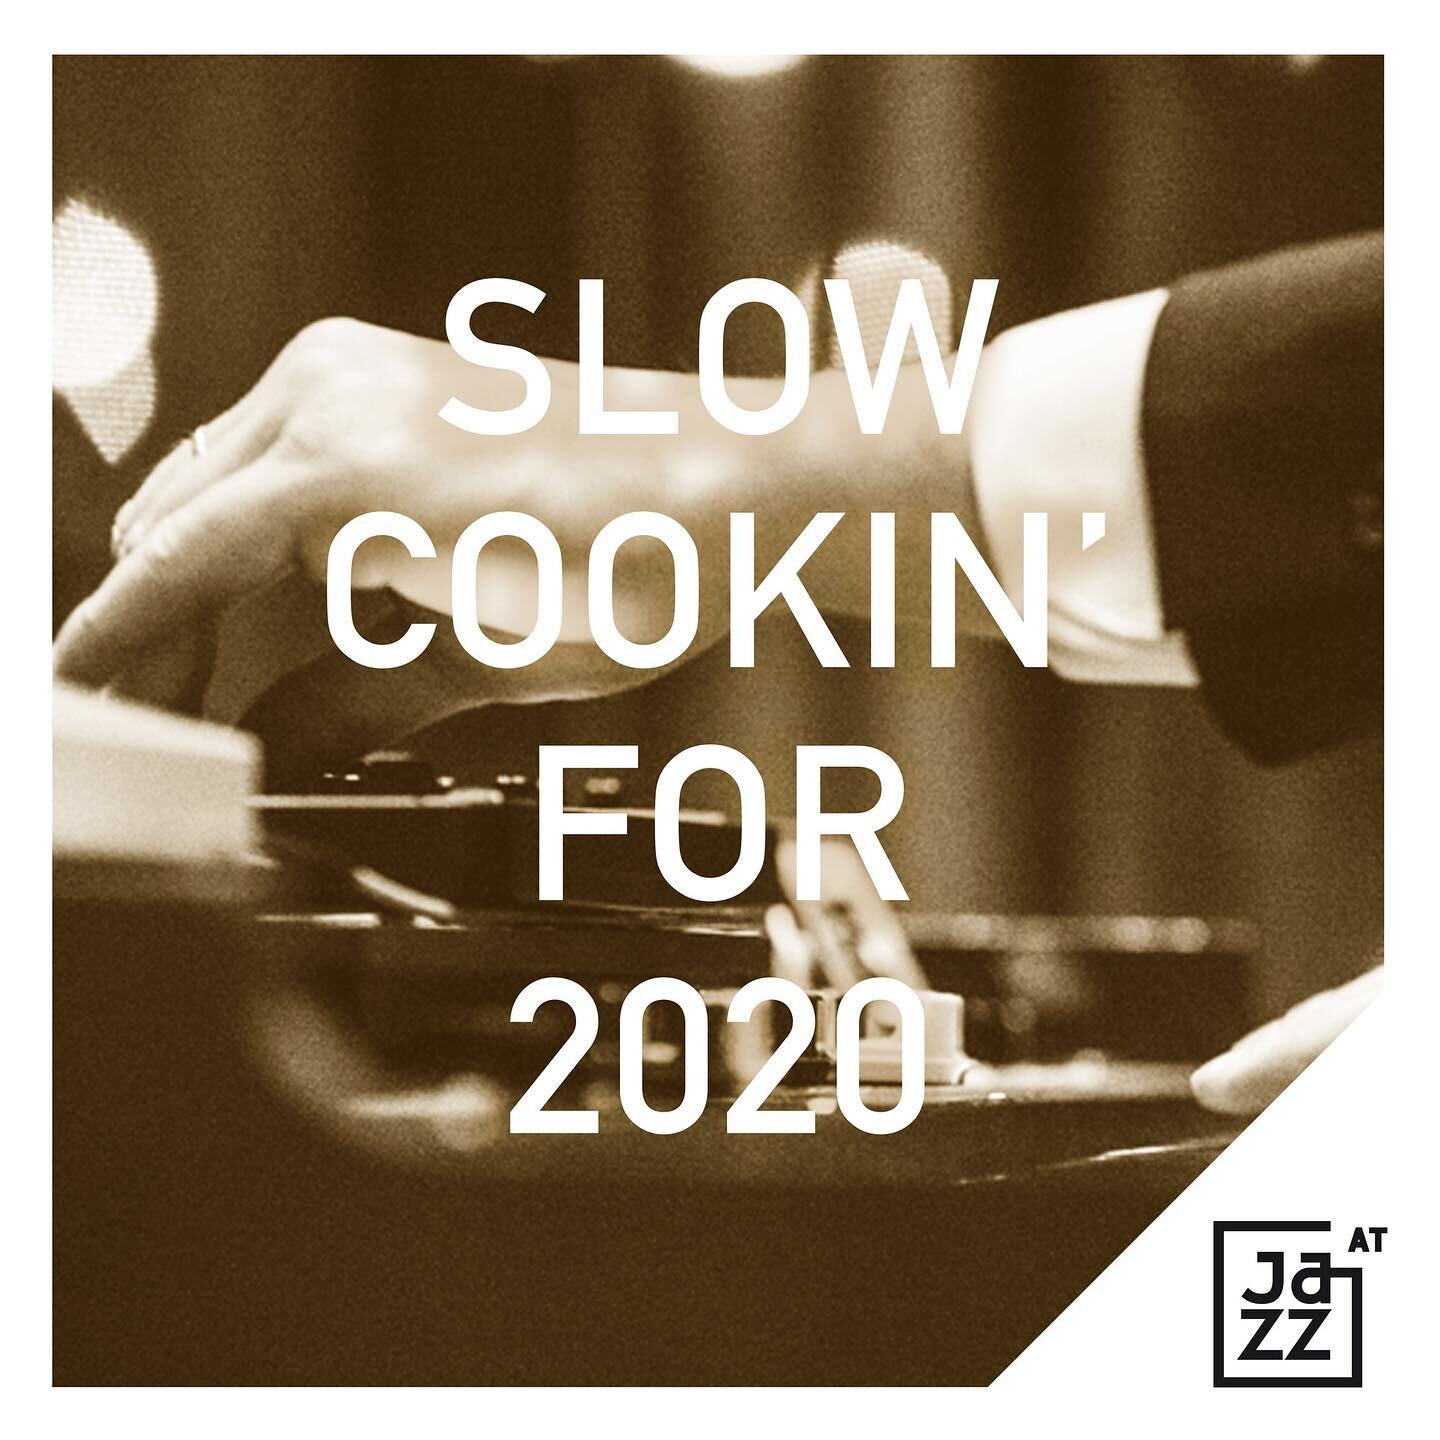 Slow cookin&rsquo; for 2020! 🎶🎺🎹